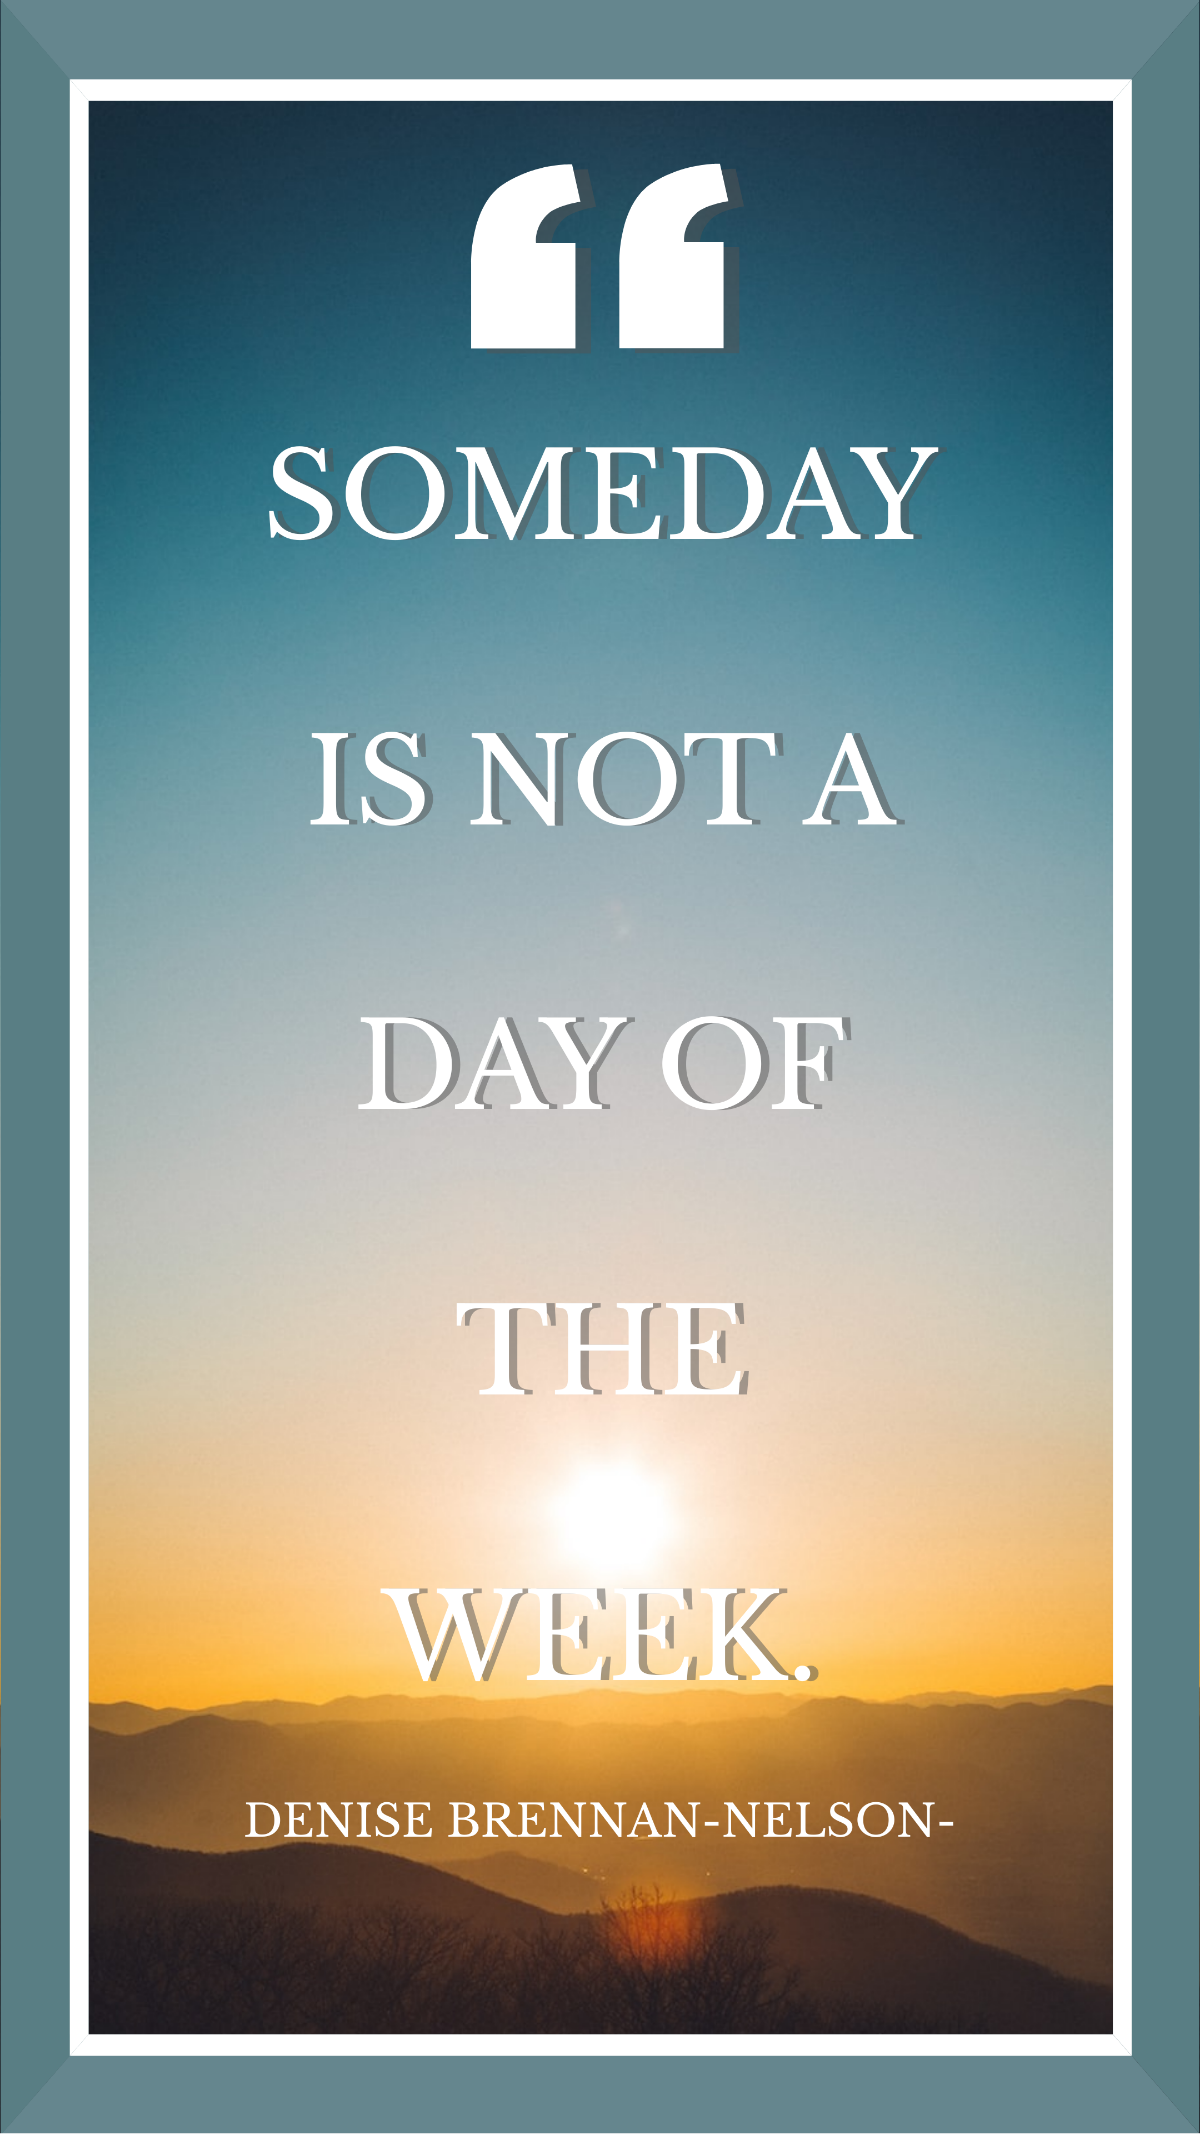 Denise Brennan-Nelson - Someday is not a day of the week. Template